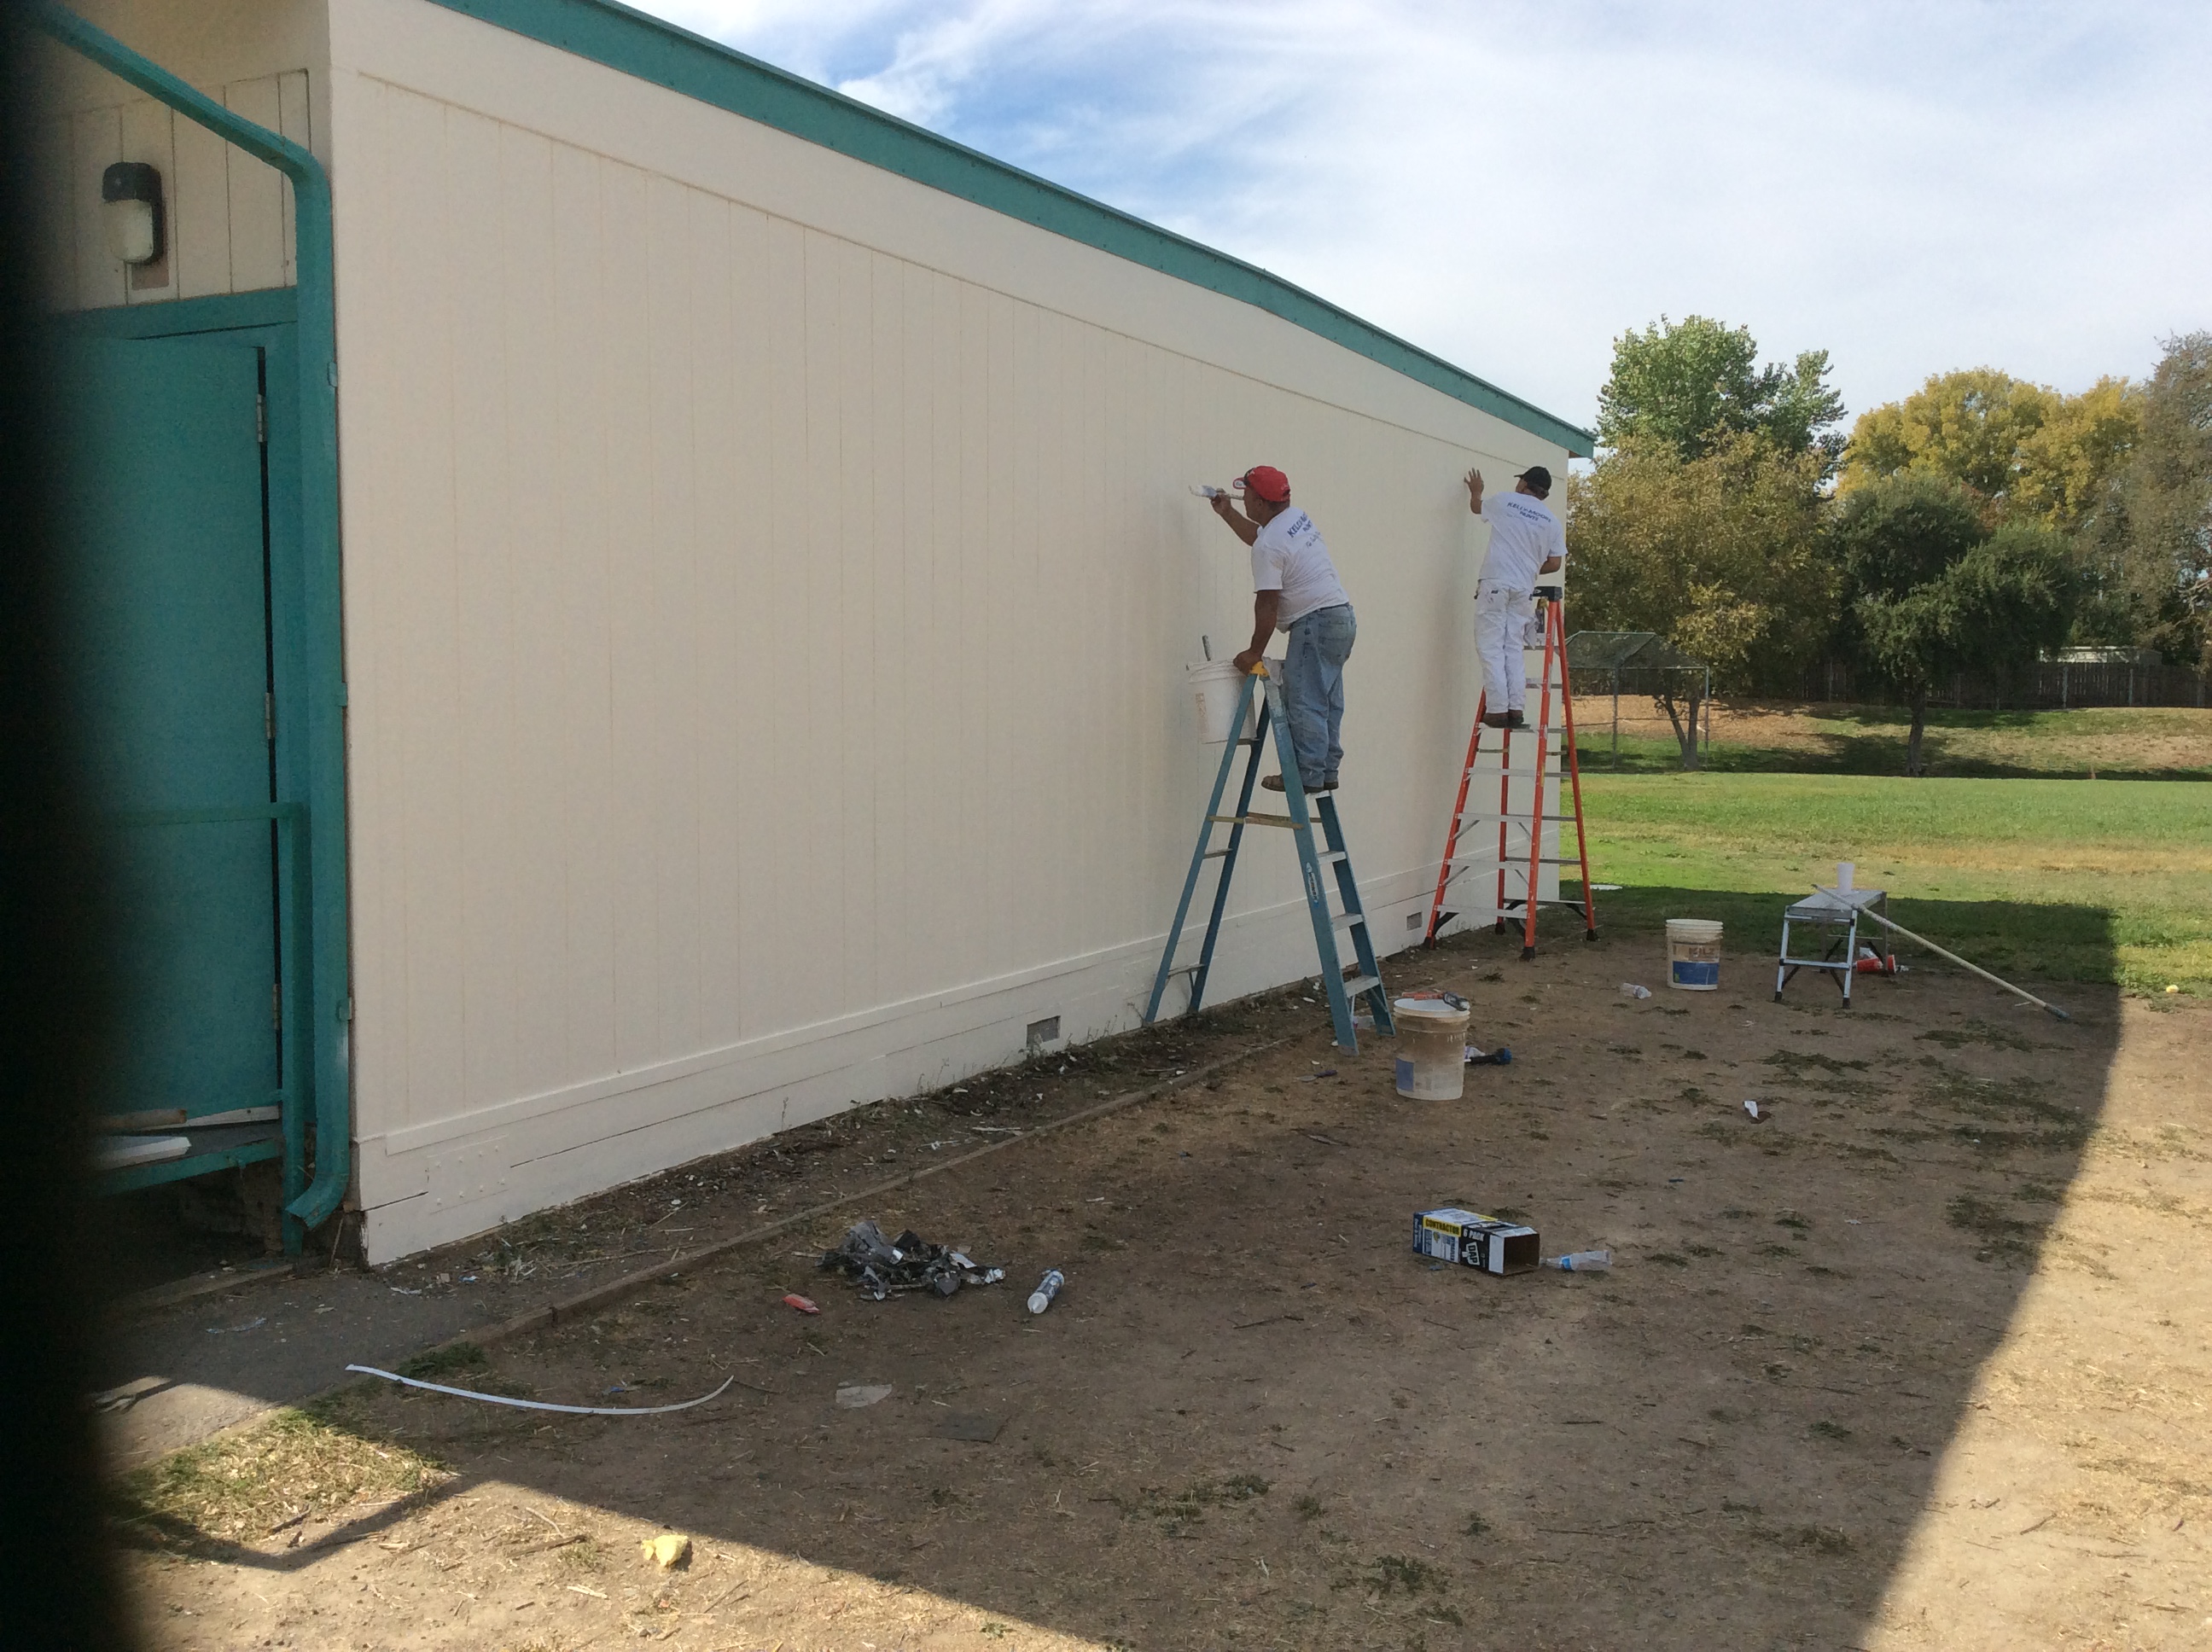 Siding Construction work at a local school - After